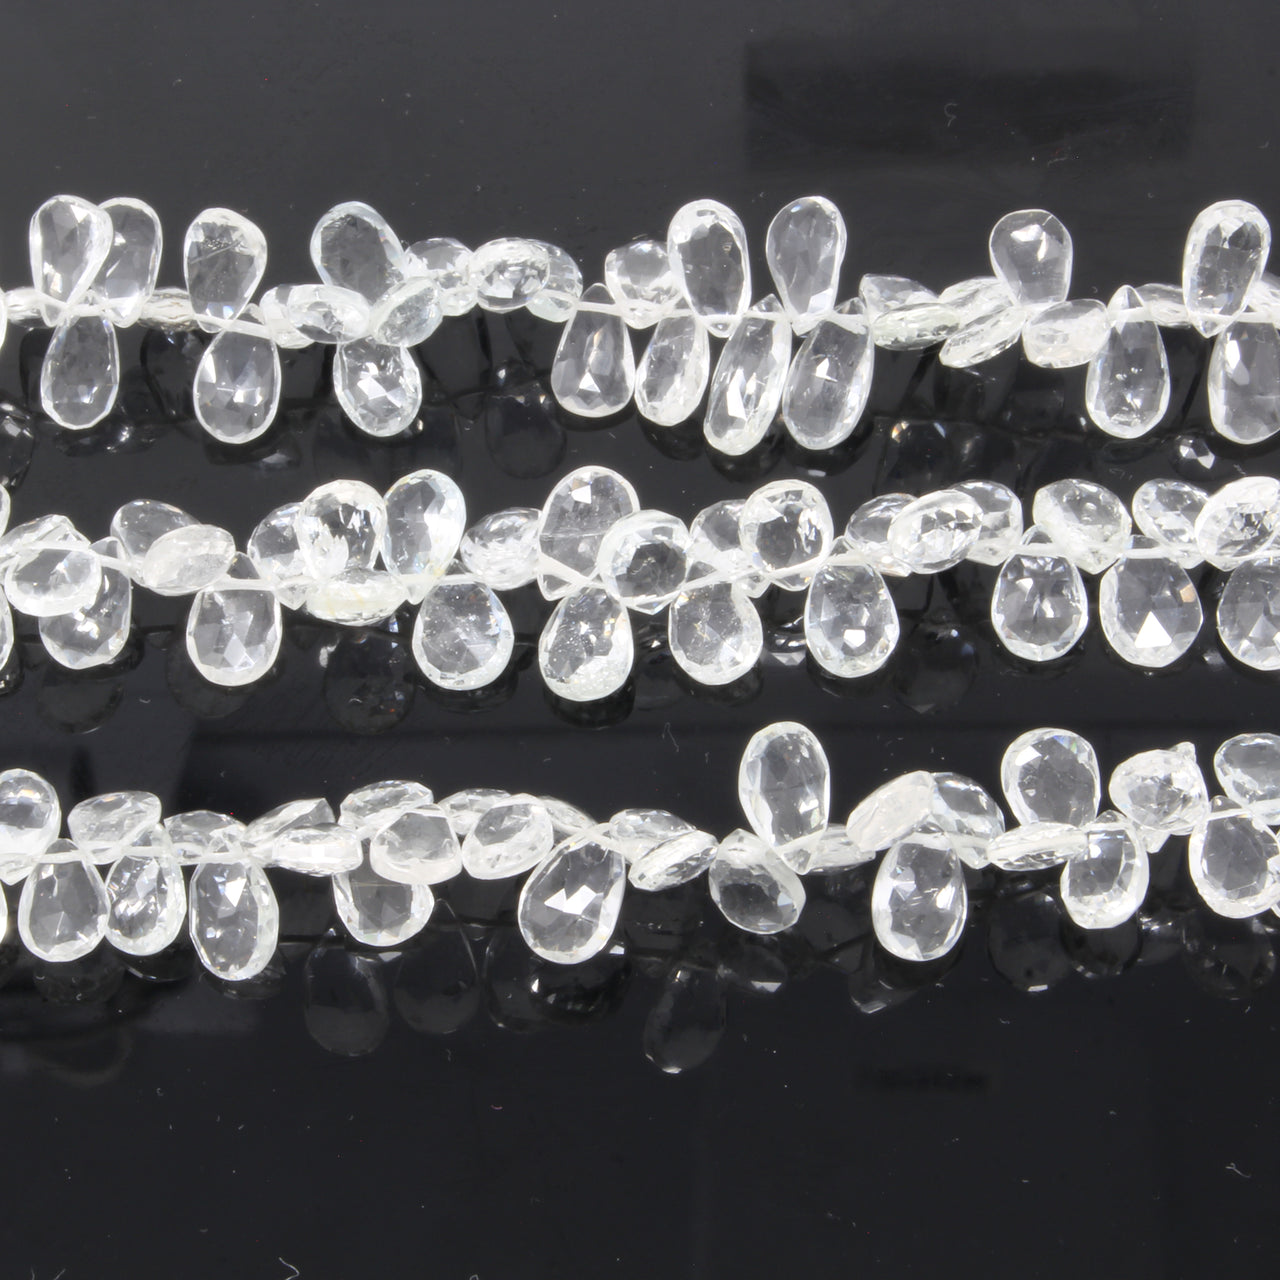 White Topaz 9x7mm Faceted Pear Shaped Briolettes